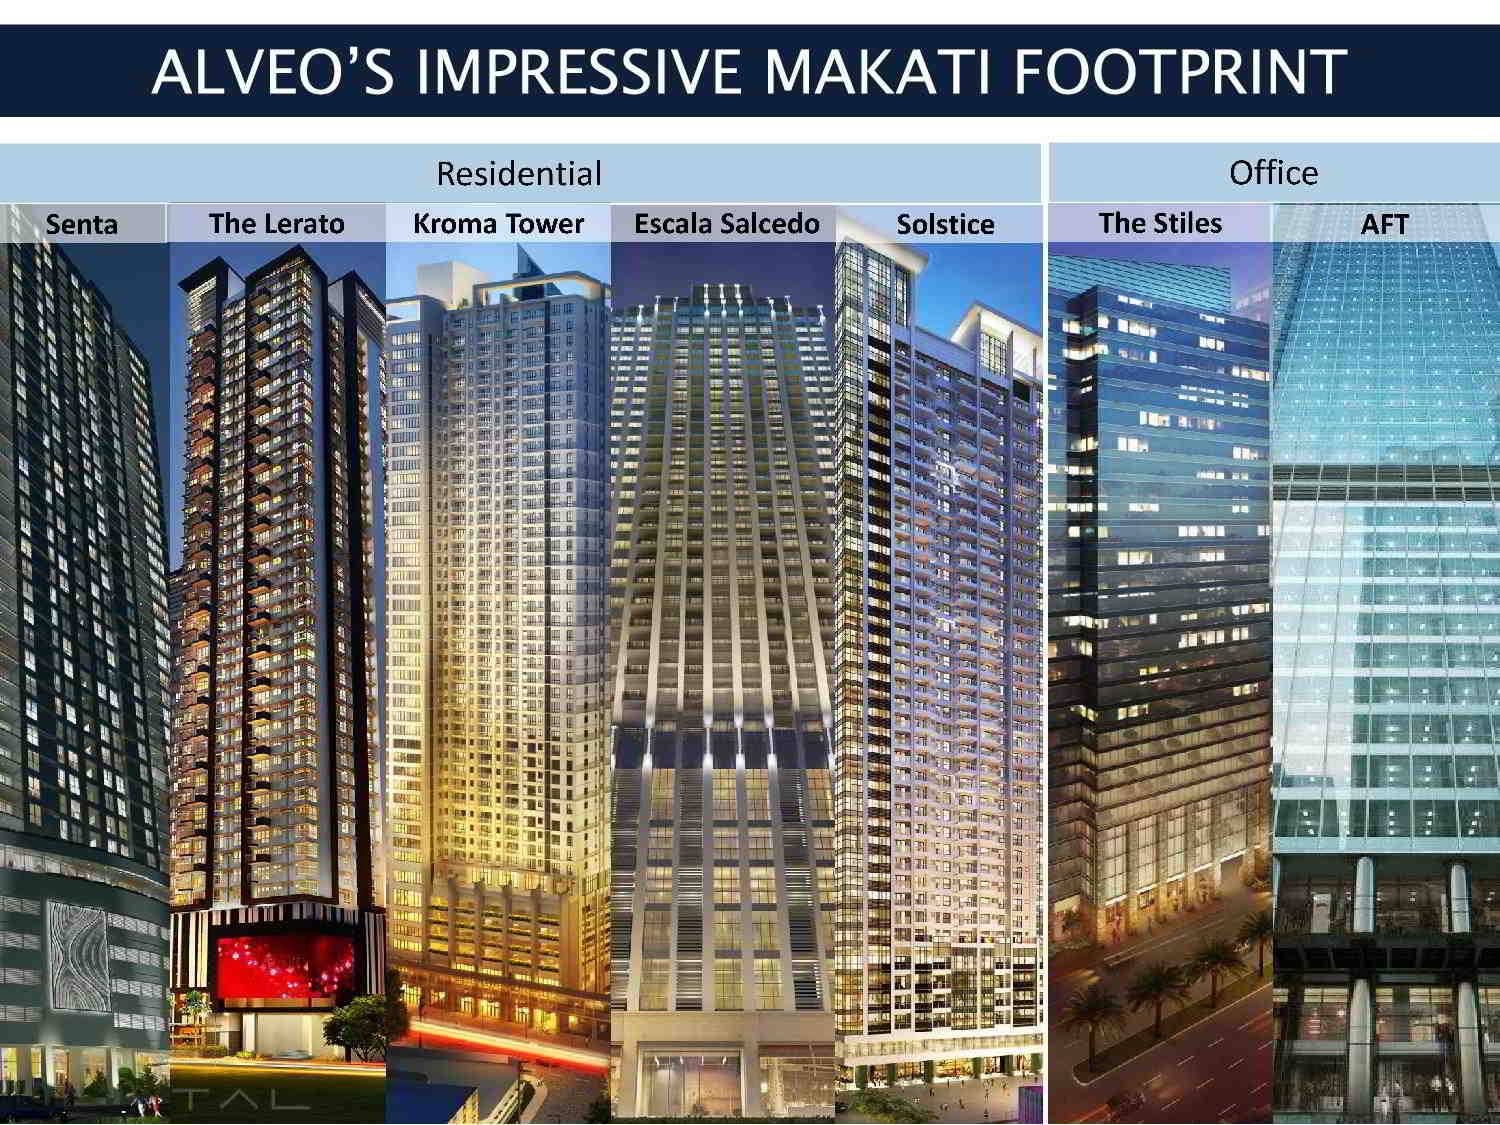 PHILIPPINES PREMIERE BUSINESS DISTRICT - GENTRY CORPORATE PLAZA